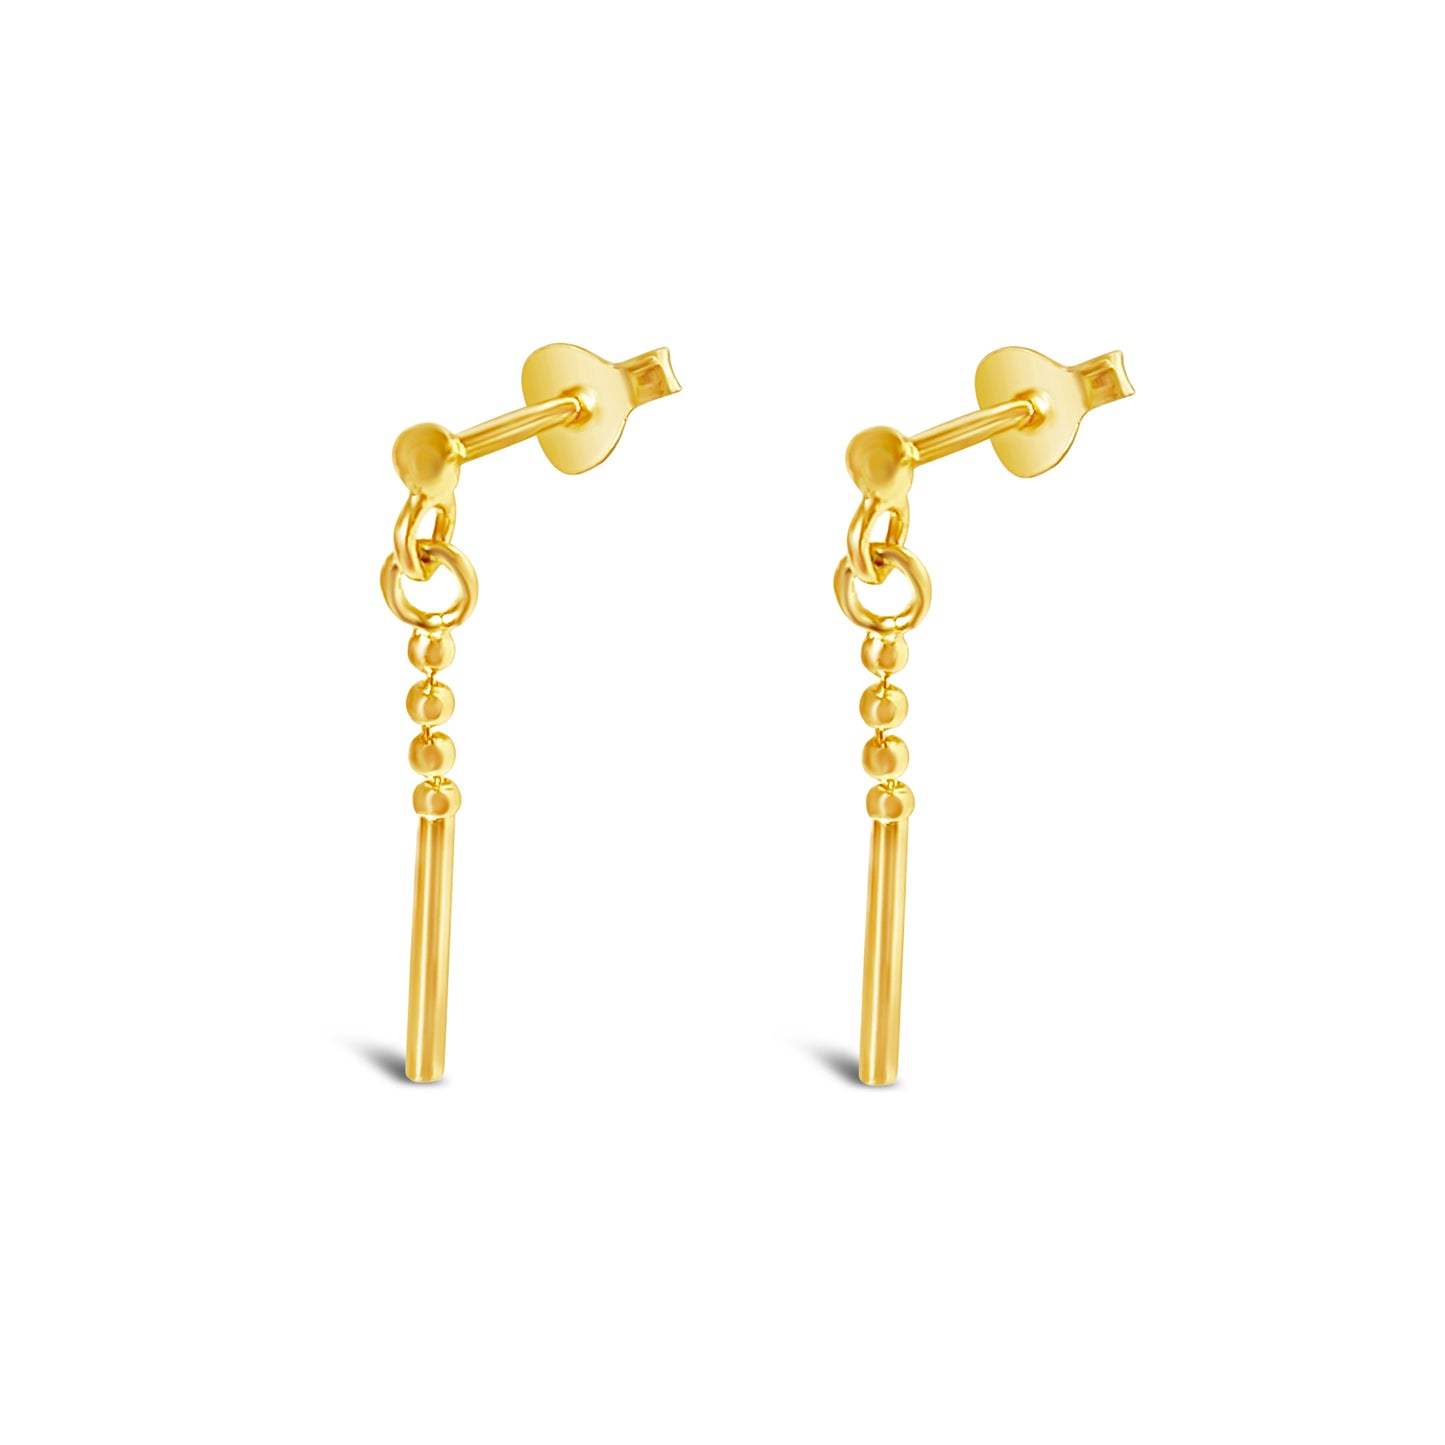 Tiny Details Earrings, Gold